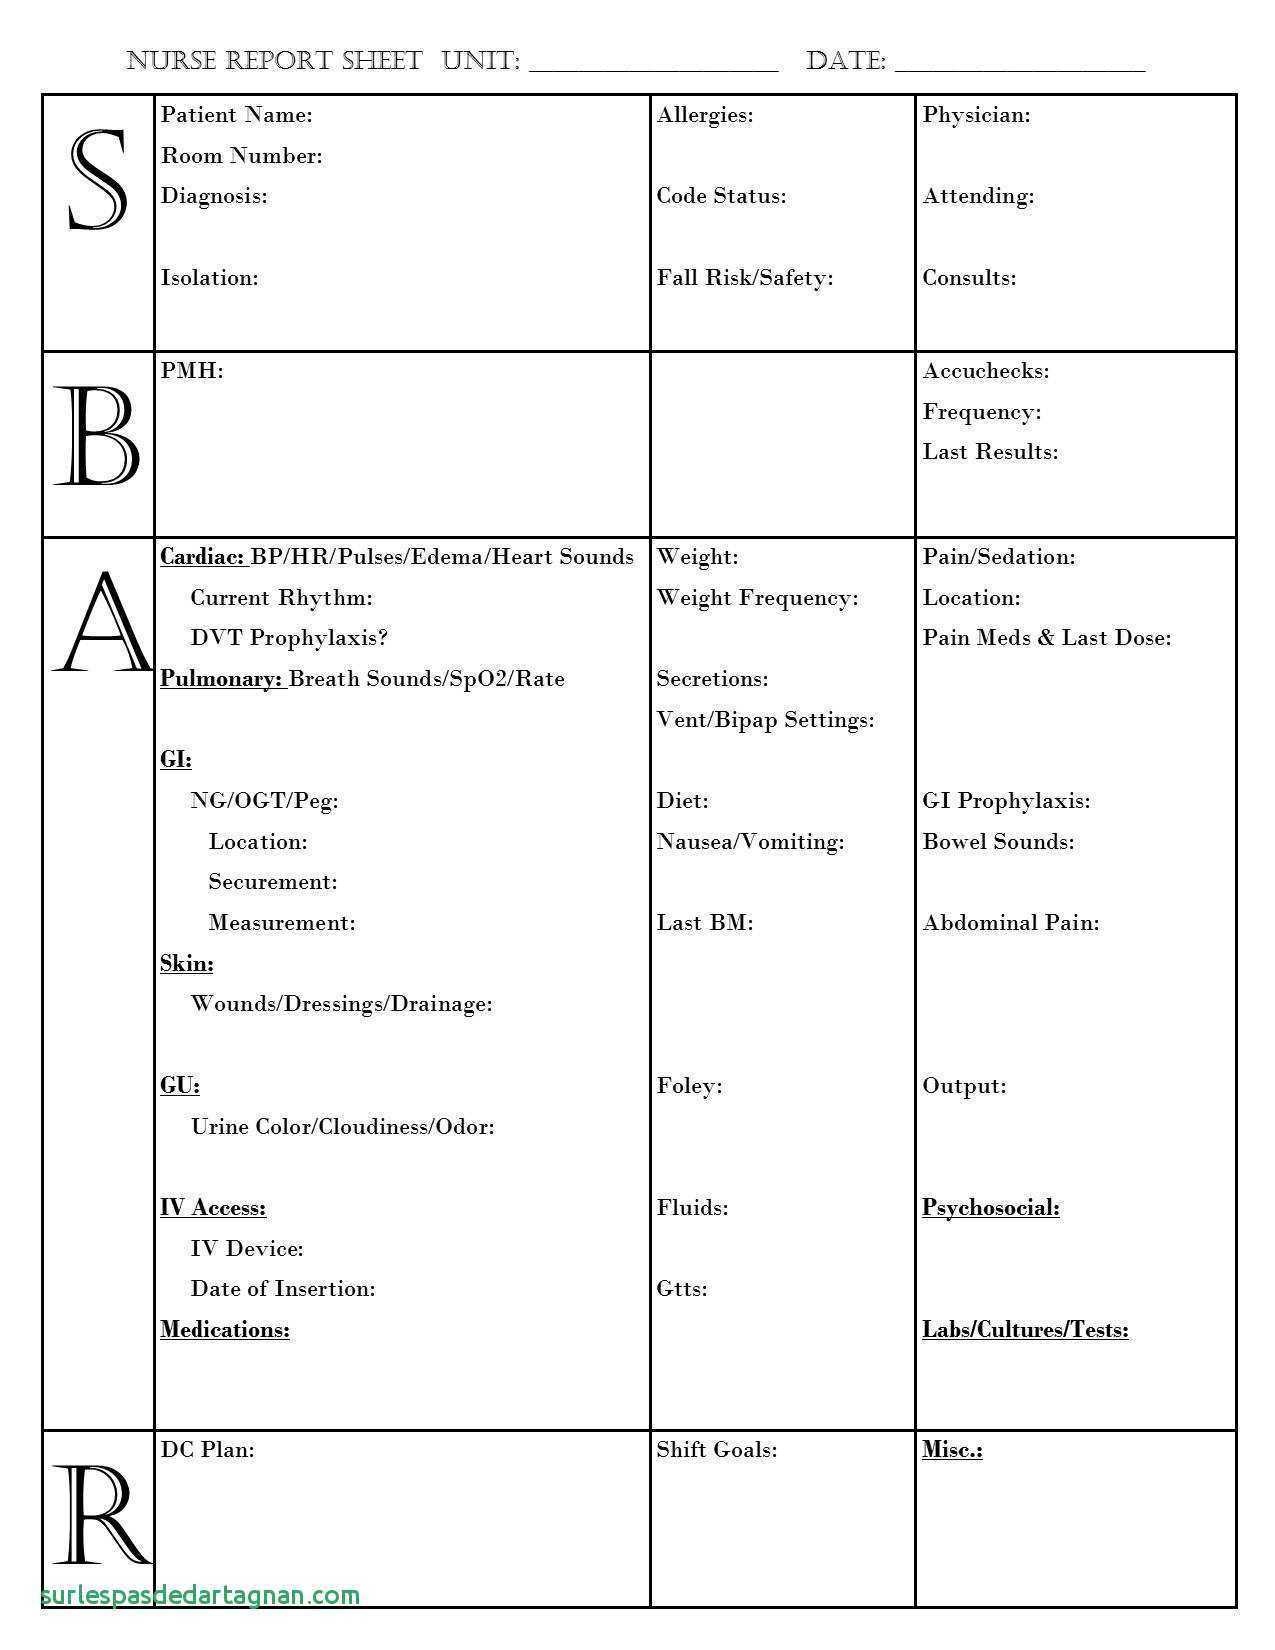 Nursing Report Sheet Template Together With Sbar Nurse With Charge Nurse Report Sheet Template